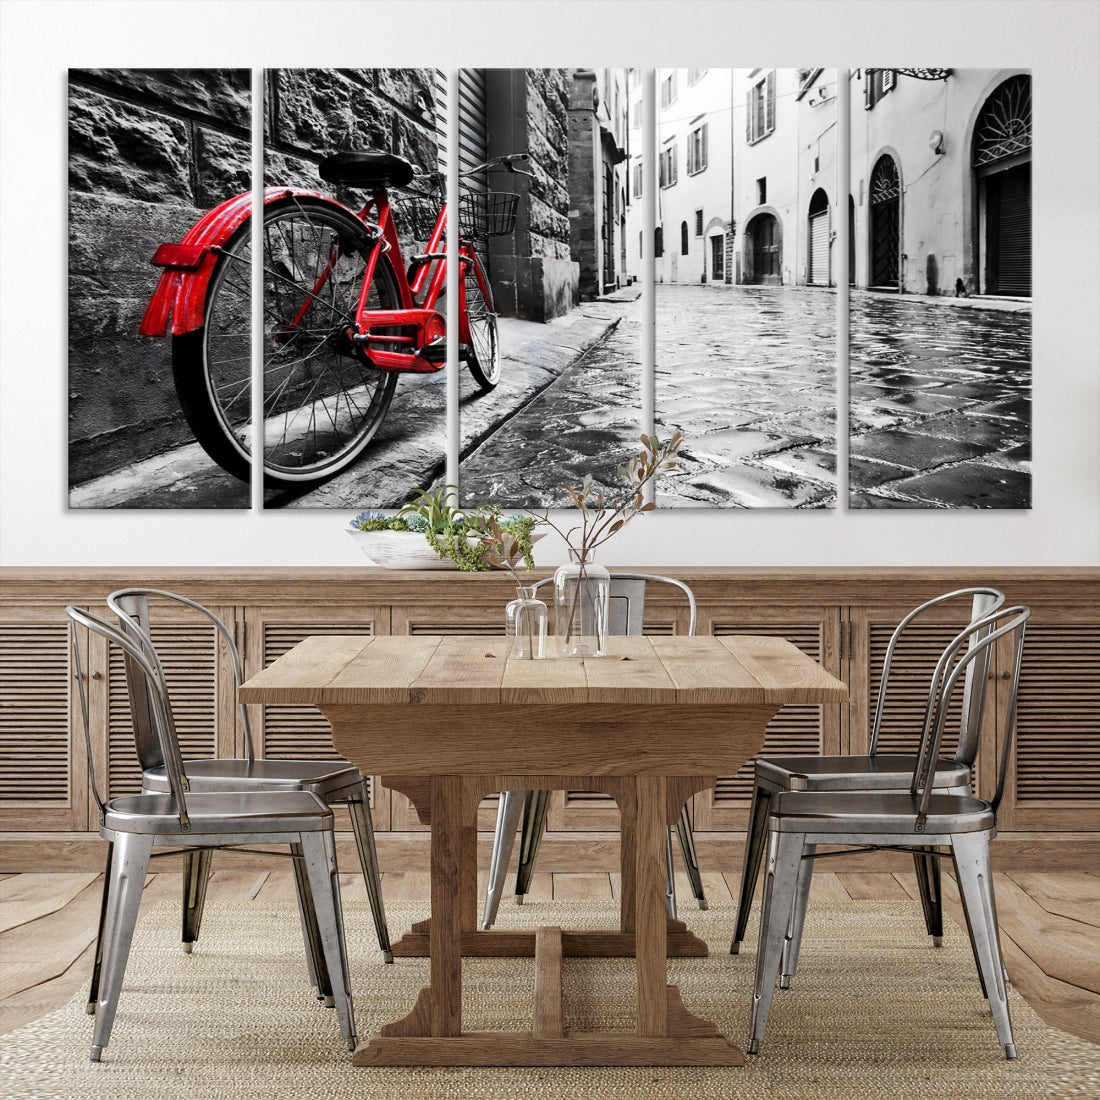 Vintage Red Bicycle on the Street Black and White Large Canvas Wall Art Giclee Print